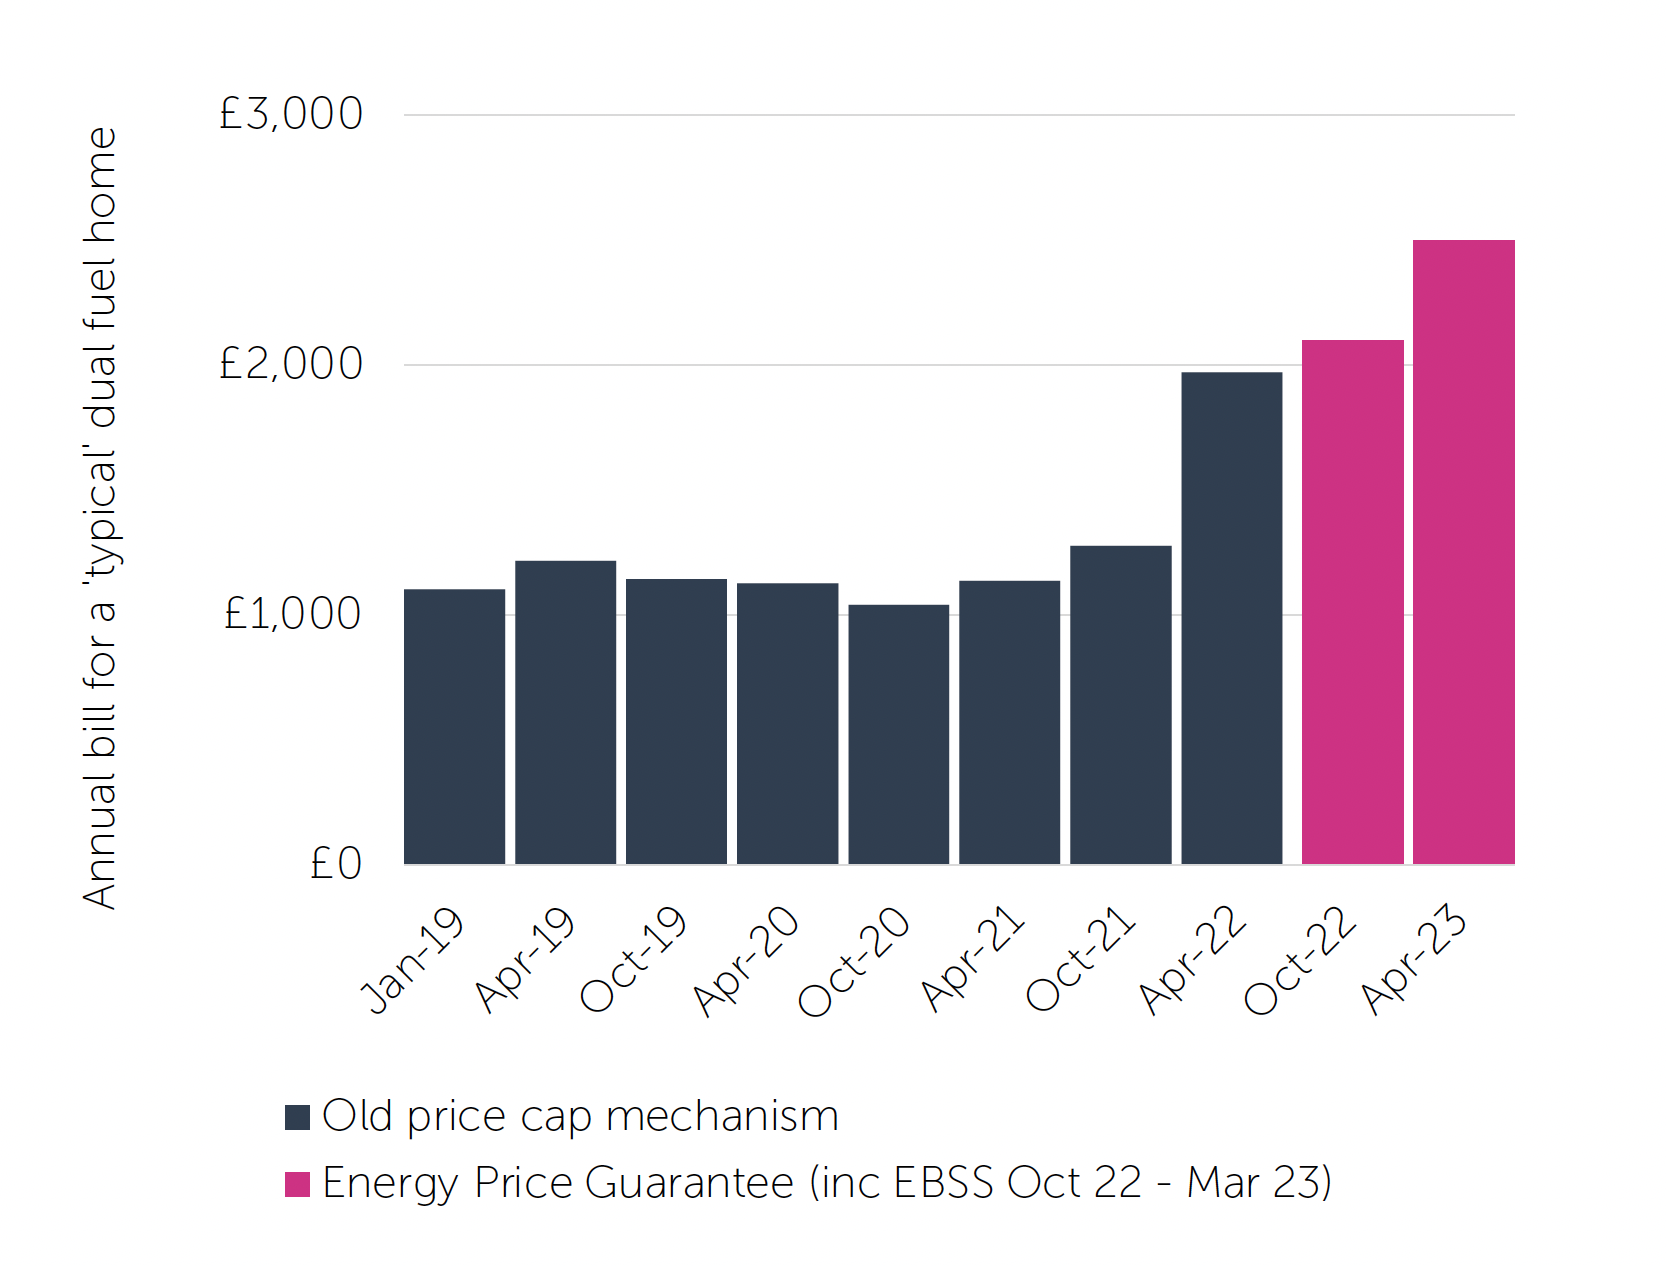 Household bills have increased by over 250% since the start of the energy crisis.